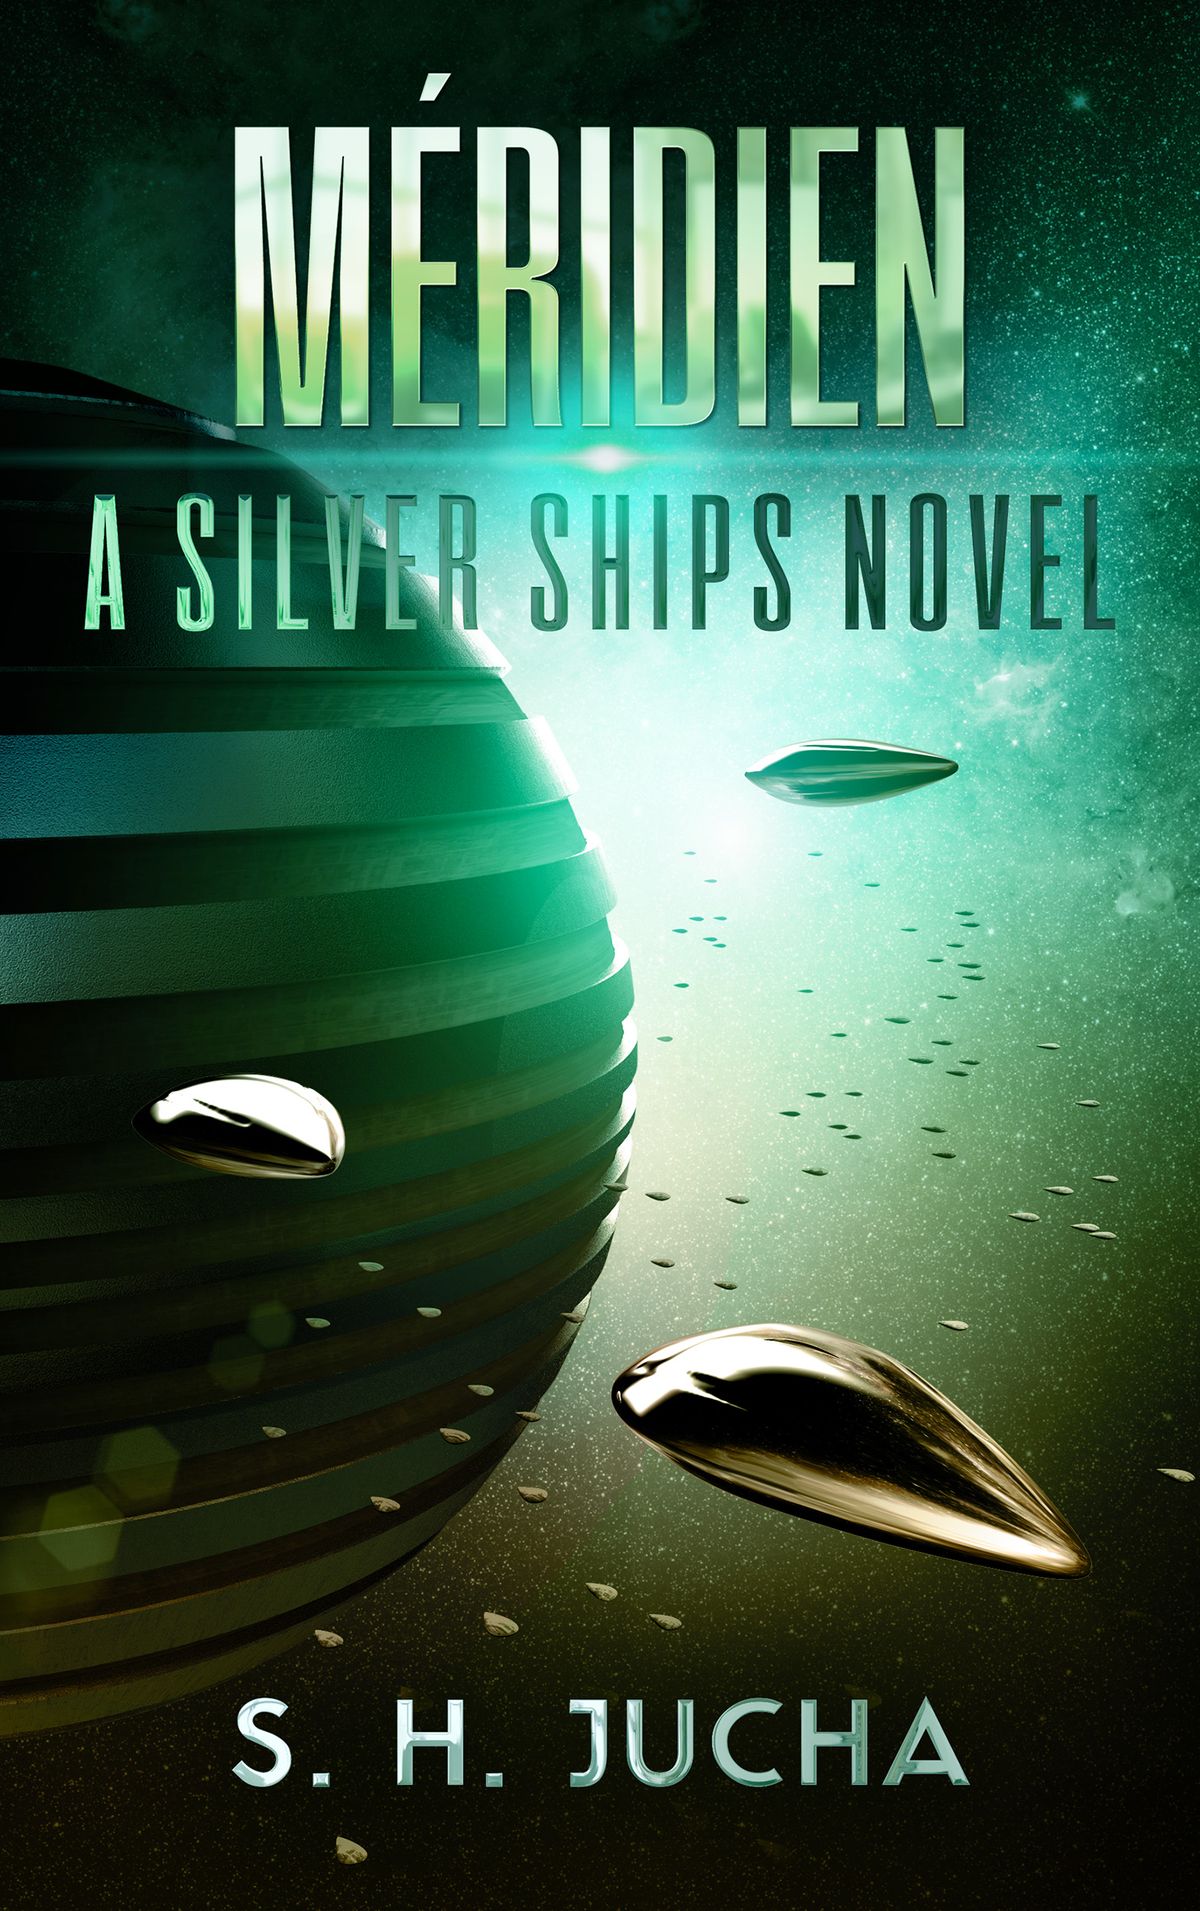 The Silver Ships by S.H. Jucha